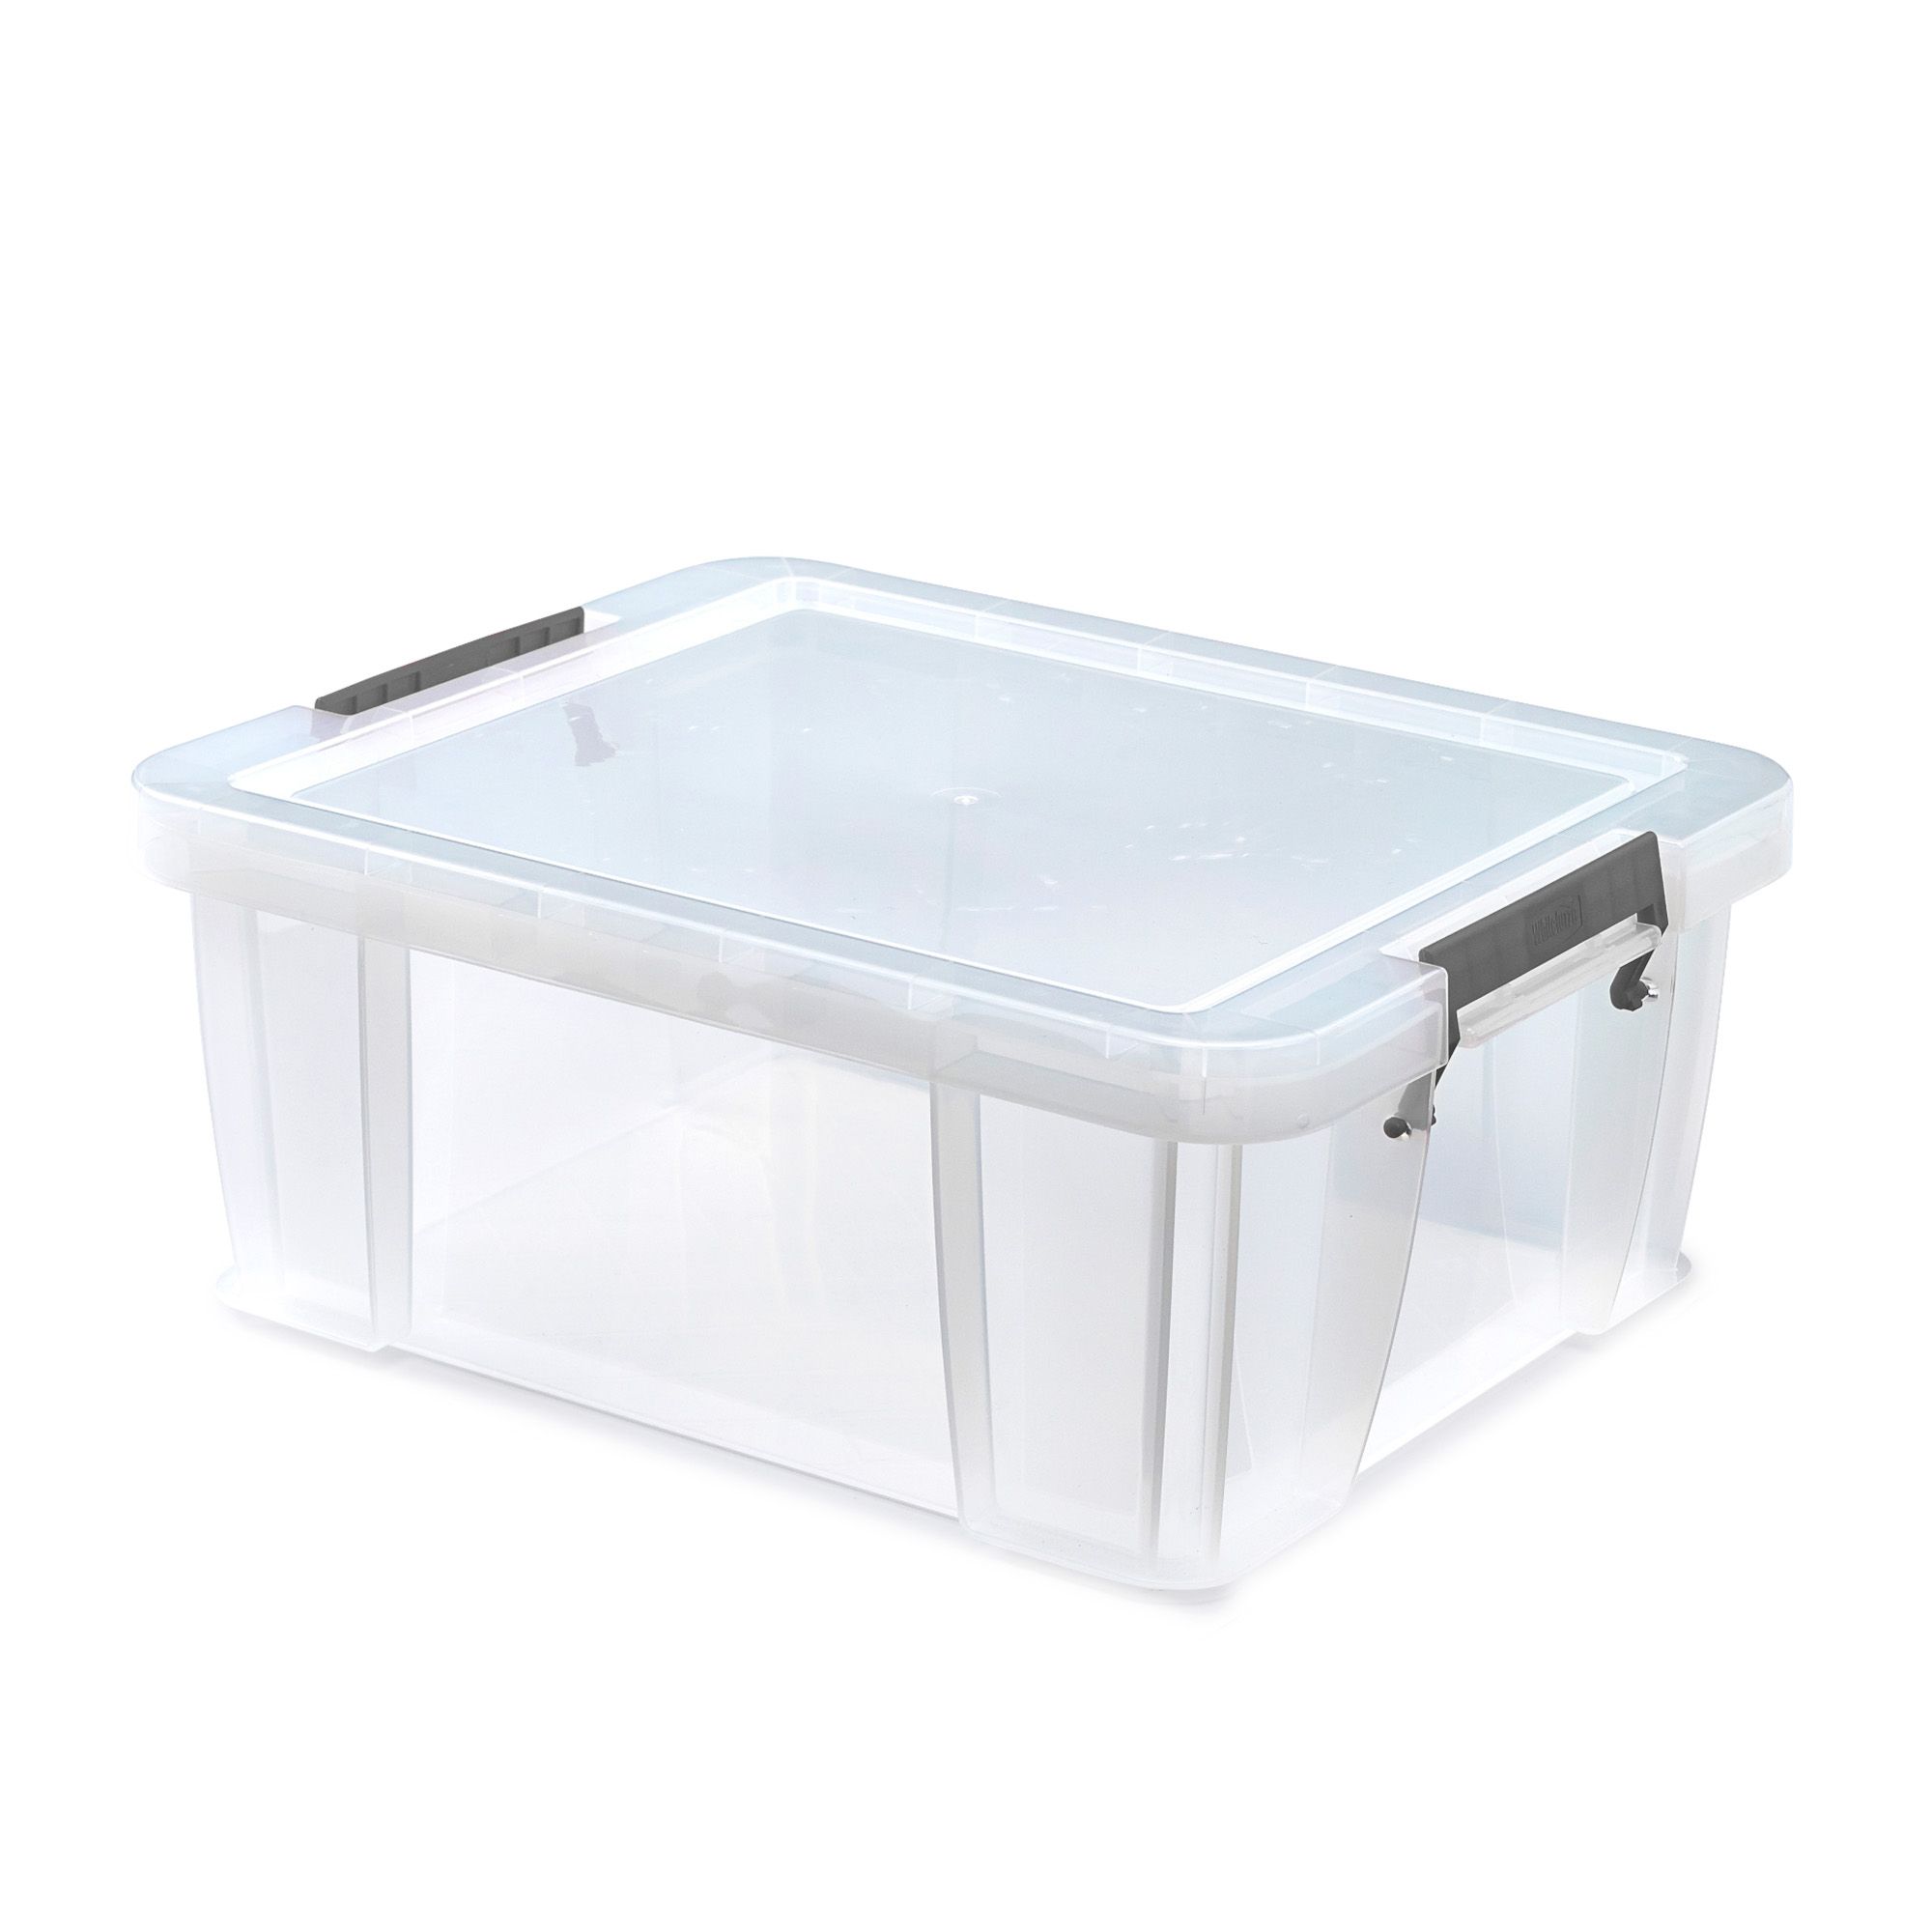 https://media.diy.com/is/image/Kingfisher/heavy-duty-clear-51l-plastic-stackable-storage-box-with-lid~5016447041006_01c_bq?$MOB_PREV$&$width=768&$height=768